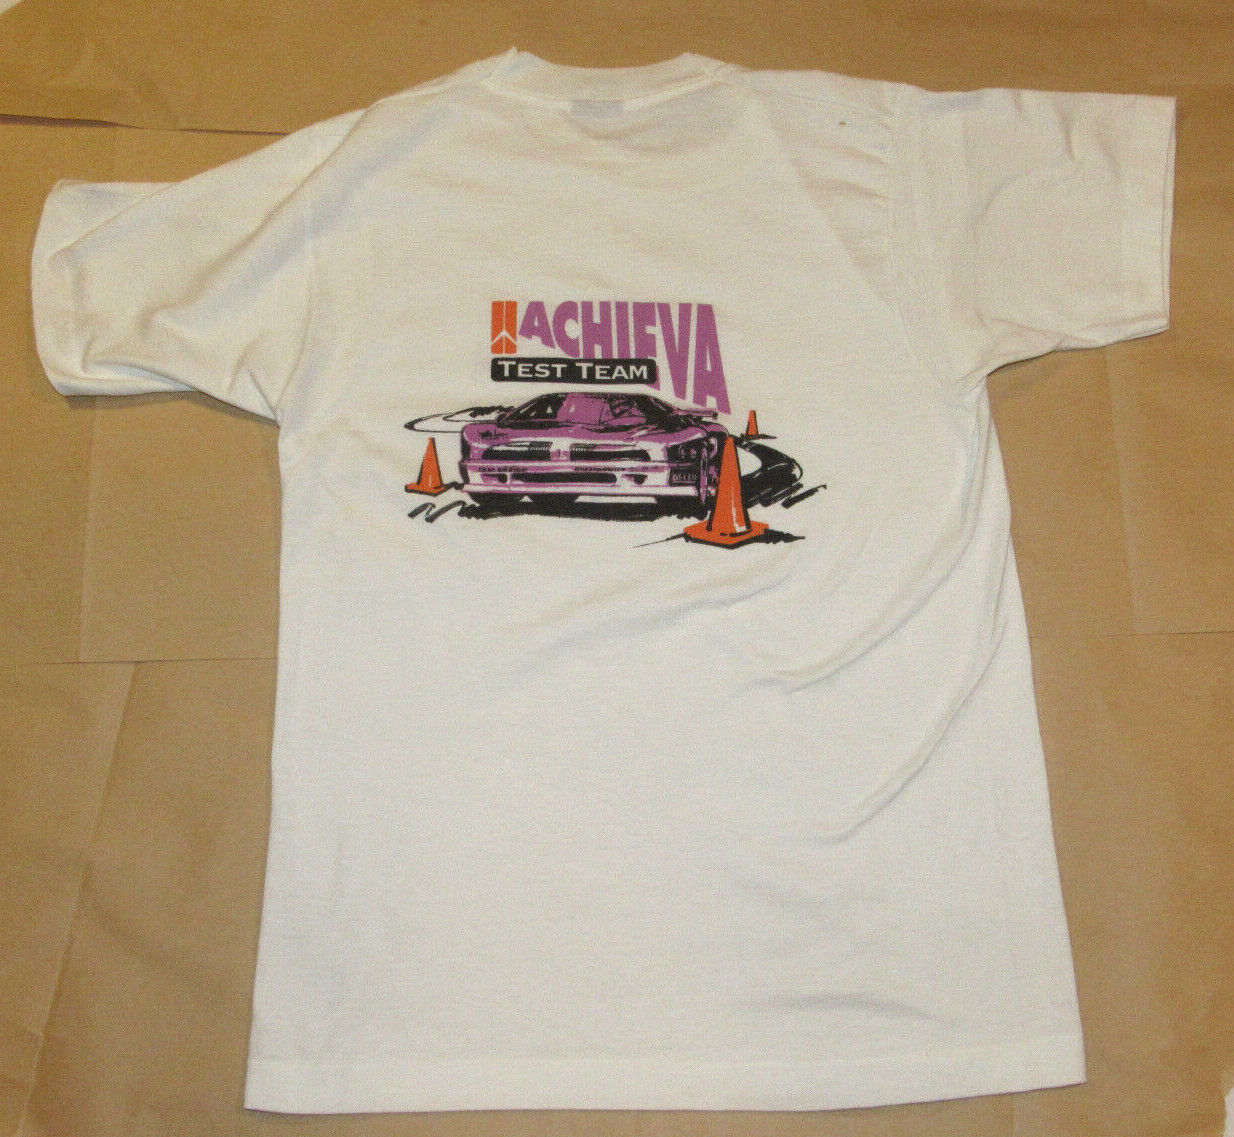 VINTAGE 1990s OLDSMOBILE ACHIEVA TEST TEAM T-SHIRT OLDS RACING MADE IN USA M